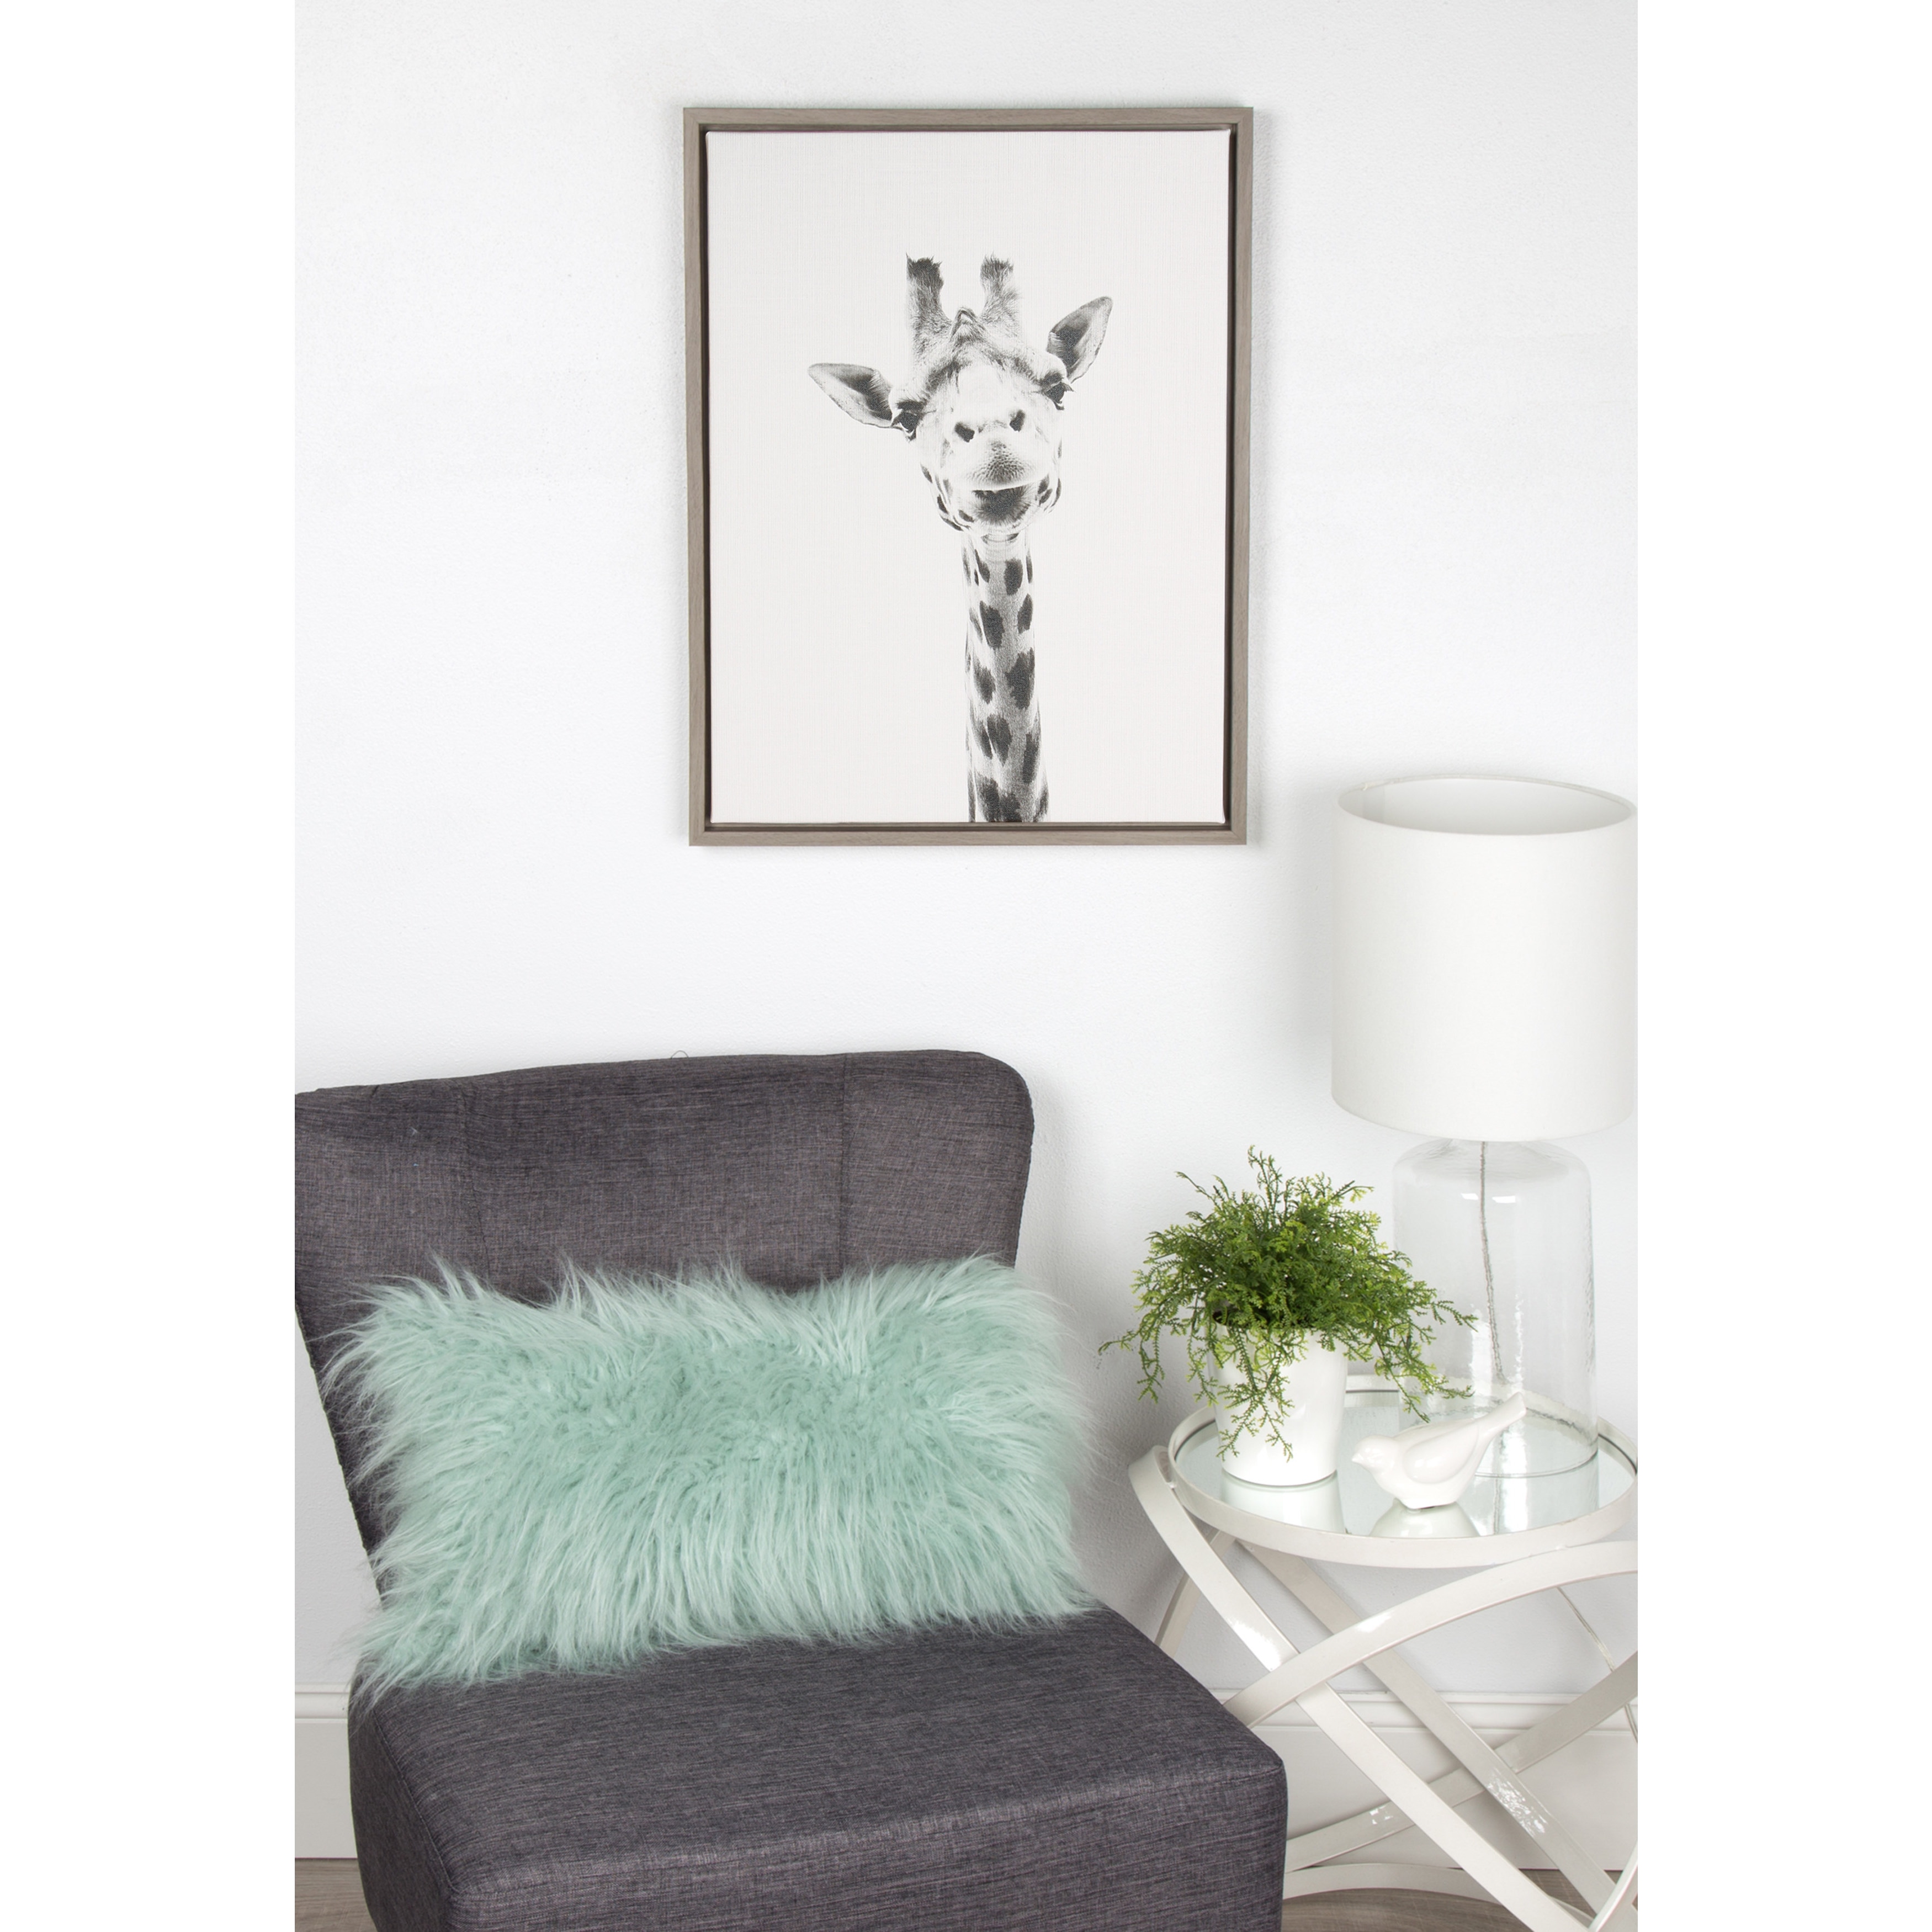 Top Product Reviews for Kate and Laurel Sylvie Giraffe Animal Print Black  and White Portrait Framed Canvas Wall Art by Simon Te Tai, 18x24 Gray  14219049 Bed Bath  Beyond